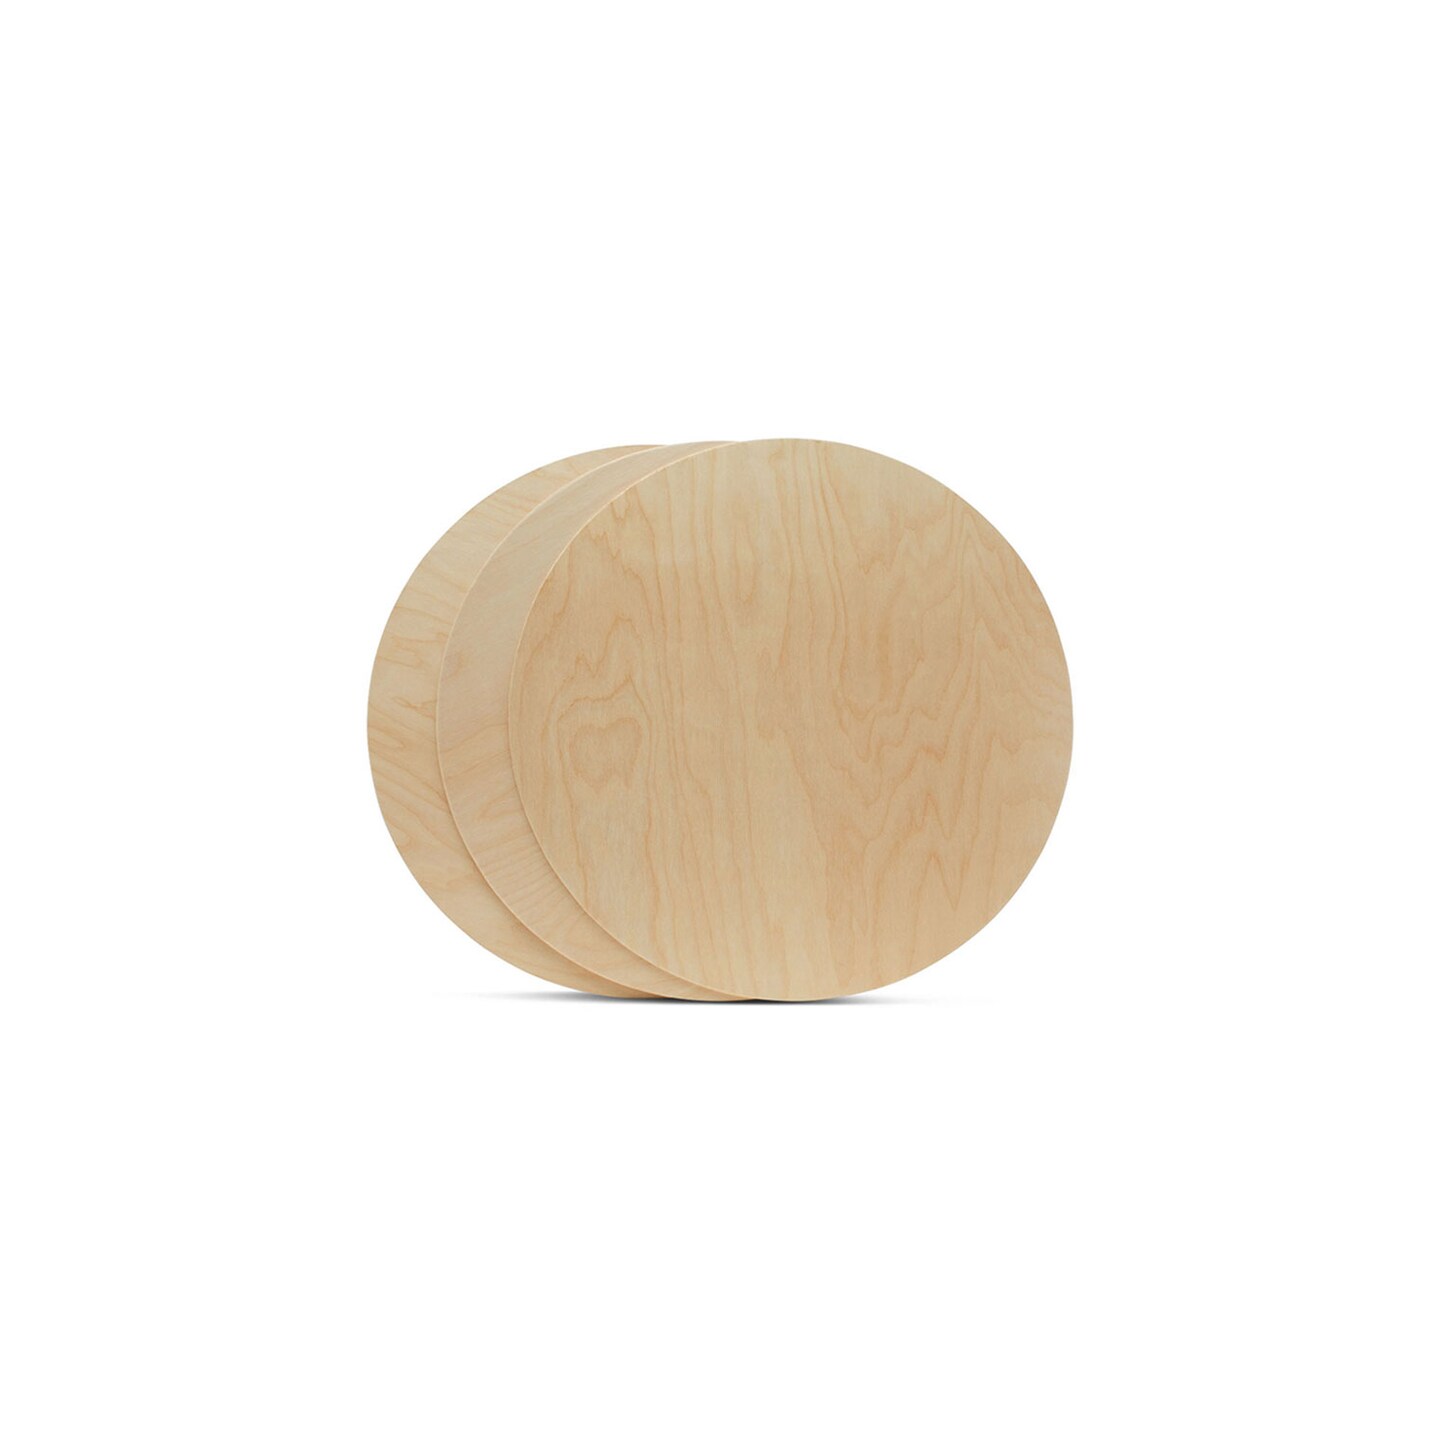 Wood Circles 12 inch 1/2 inch Thick, Unfinished Birch Plaques, Pack of 5 Wooden  Circles for Crafts and Blank Sign Rounds, by Woodpeckers 